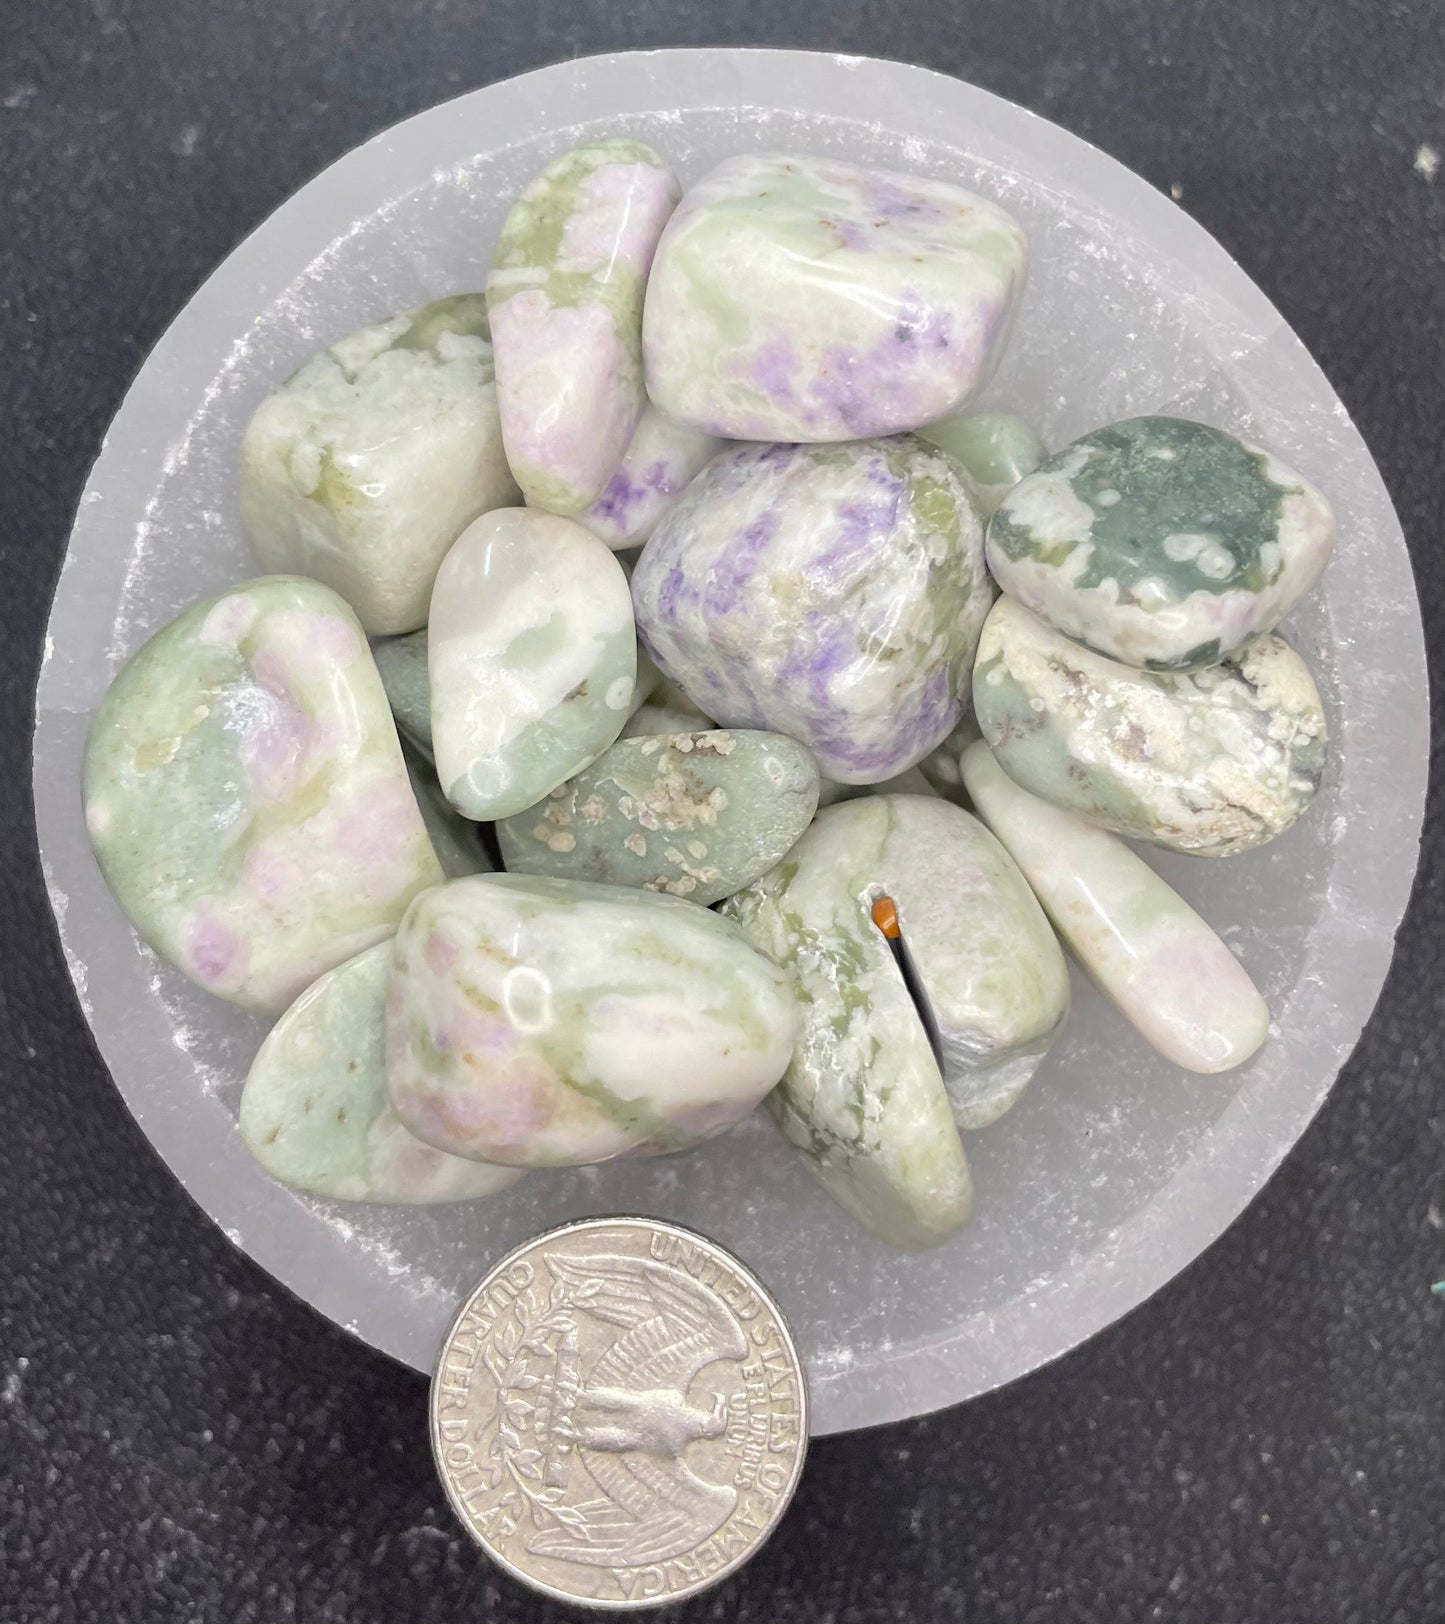 Peace Jade Tumbled Stone, 1 Pound Bag (Approx. 20-30 mm) WT-0101